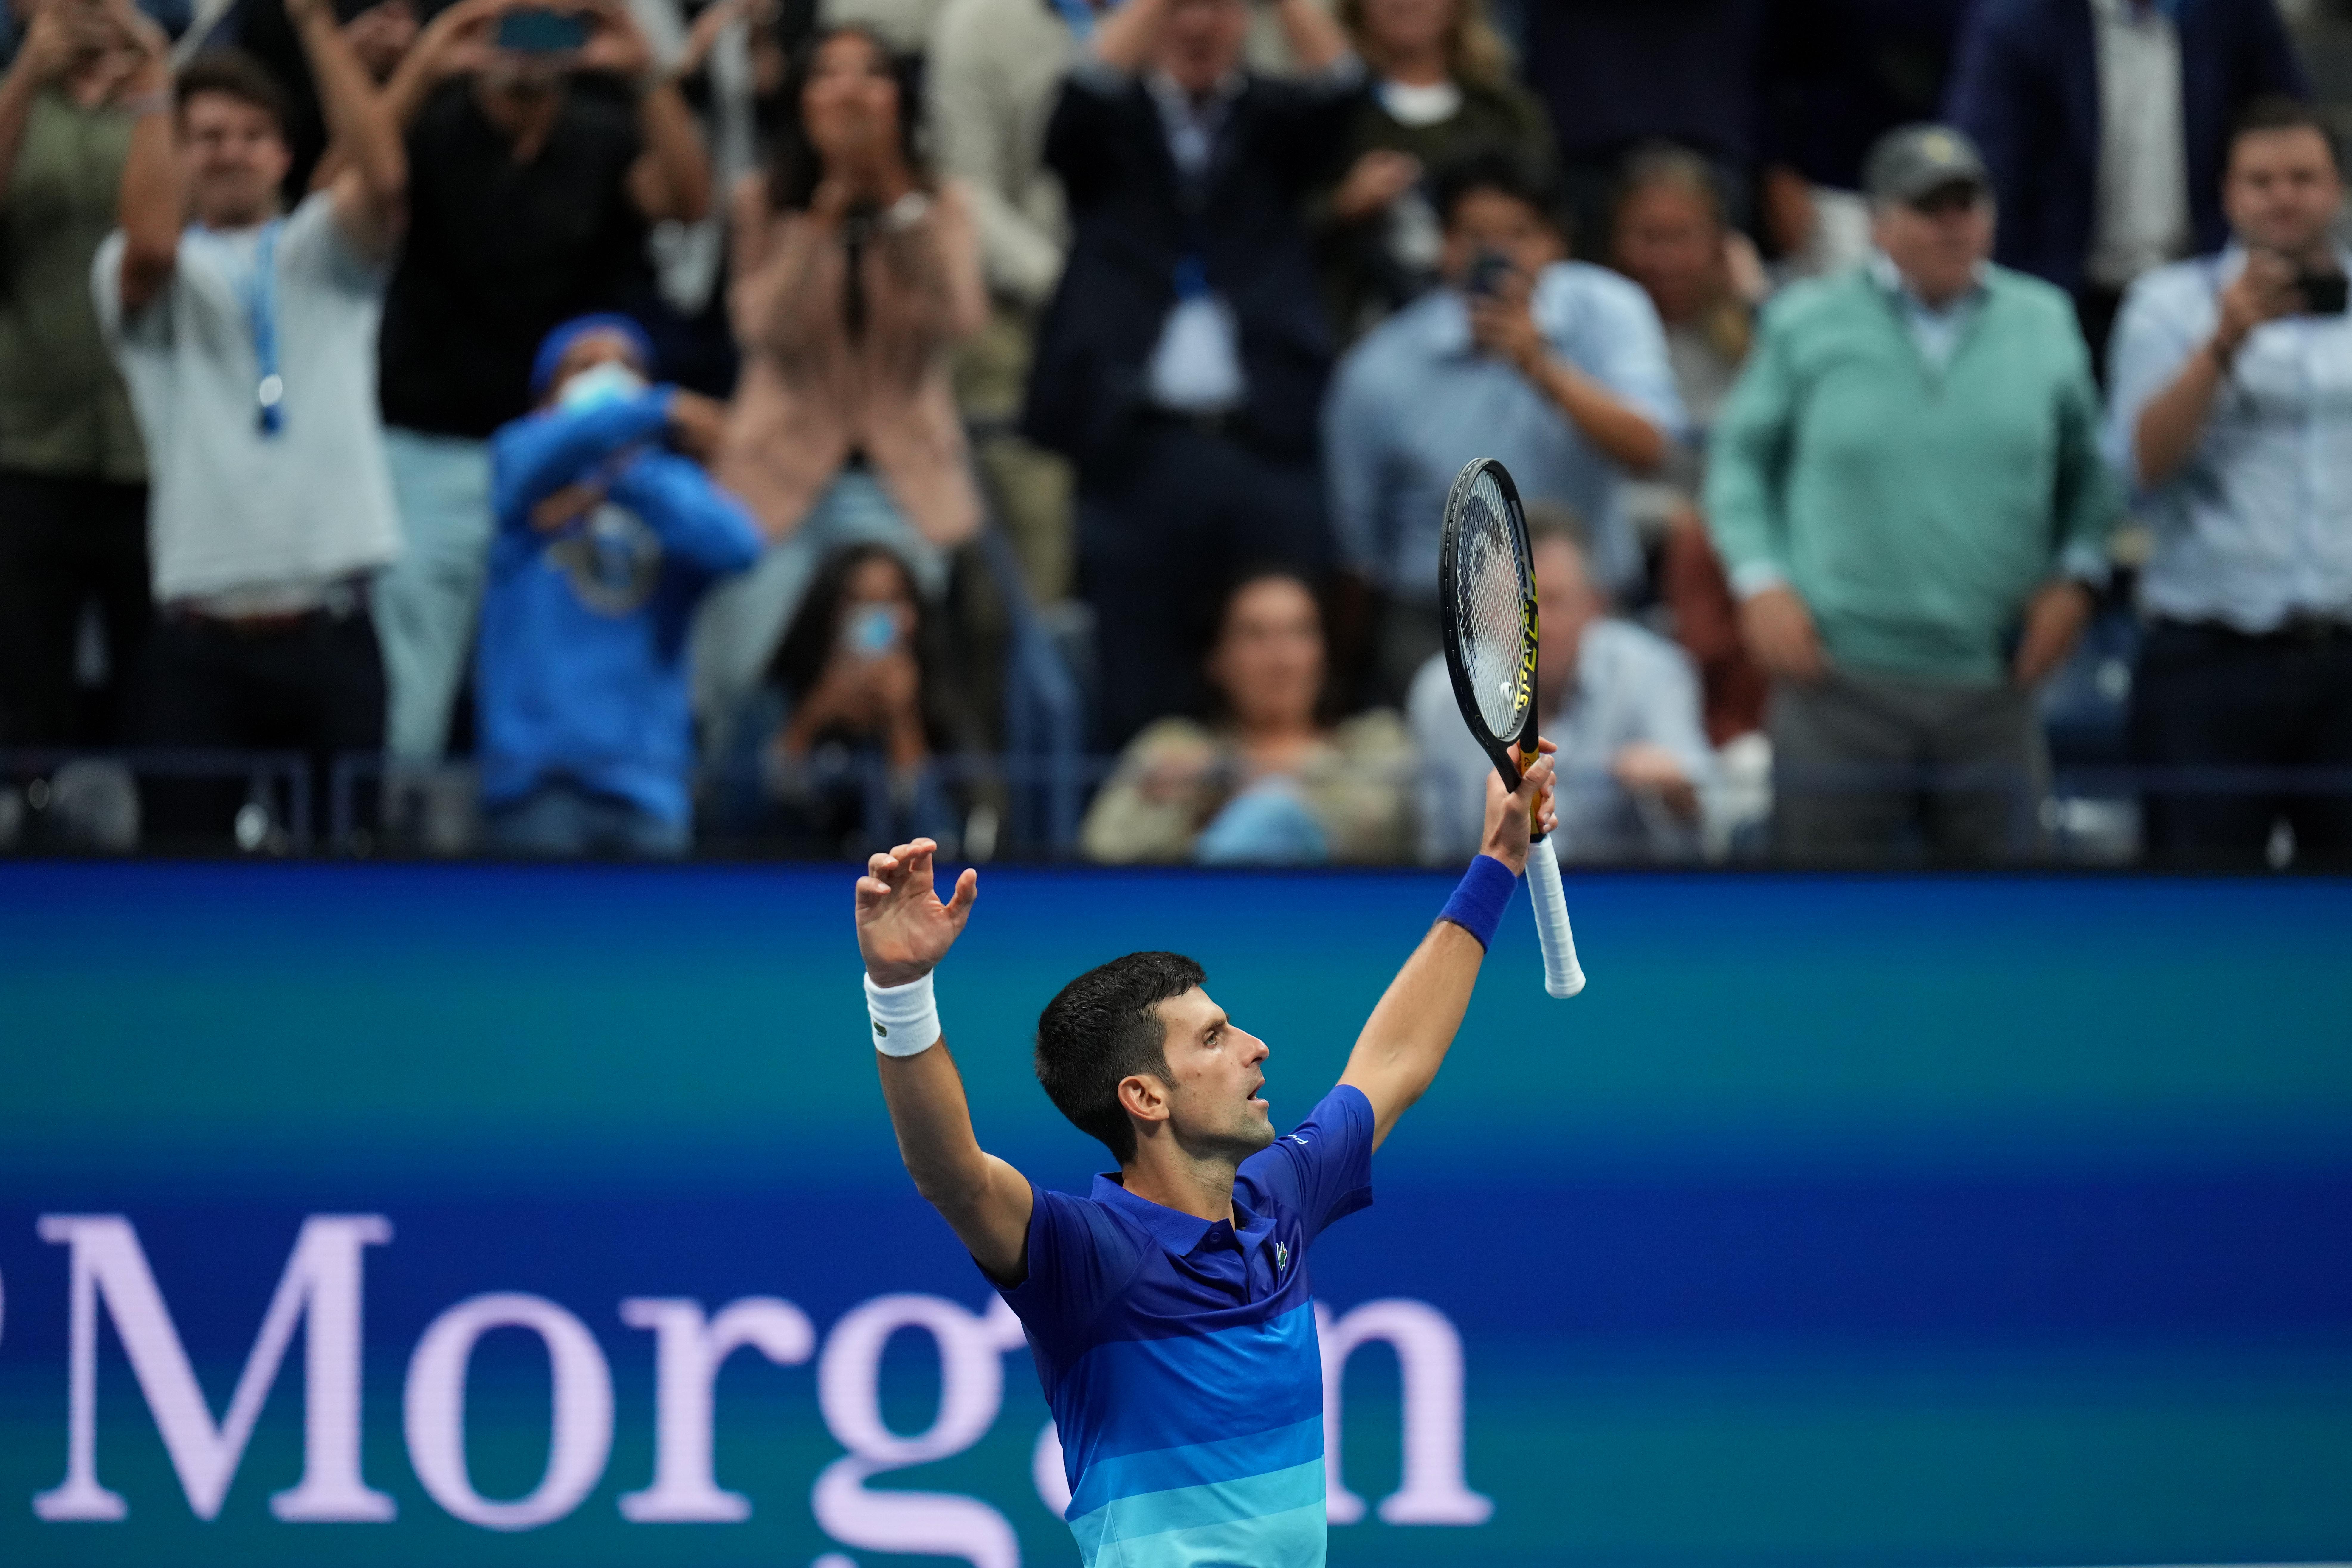  Novak Djokovic of Serbia celebrates after his match against Alexander Zverev of Germany (not pictured) on day twelve of the 2021 U.S. Open tennis 